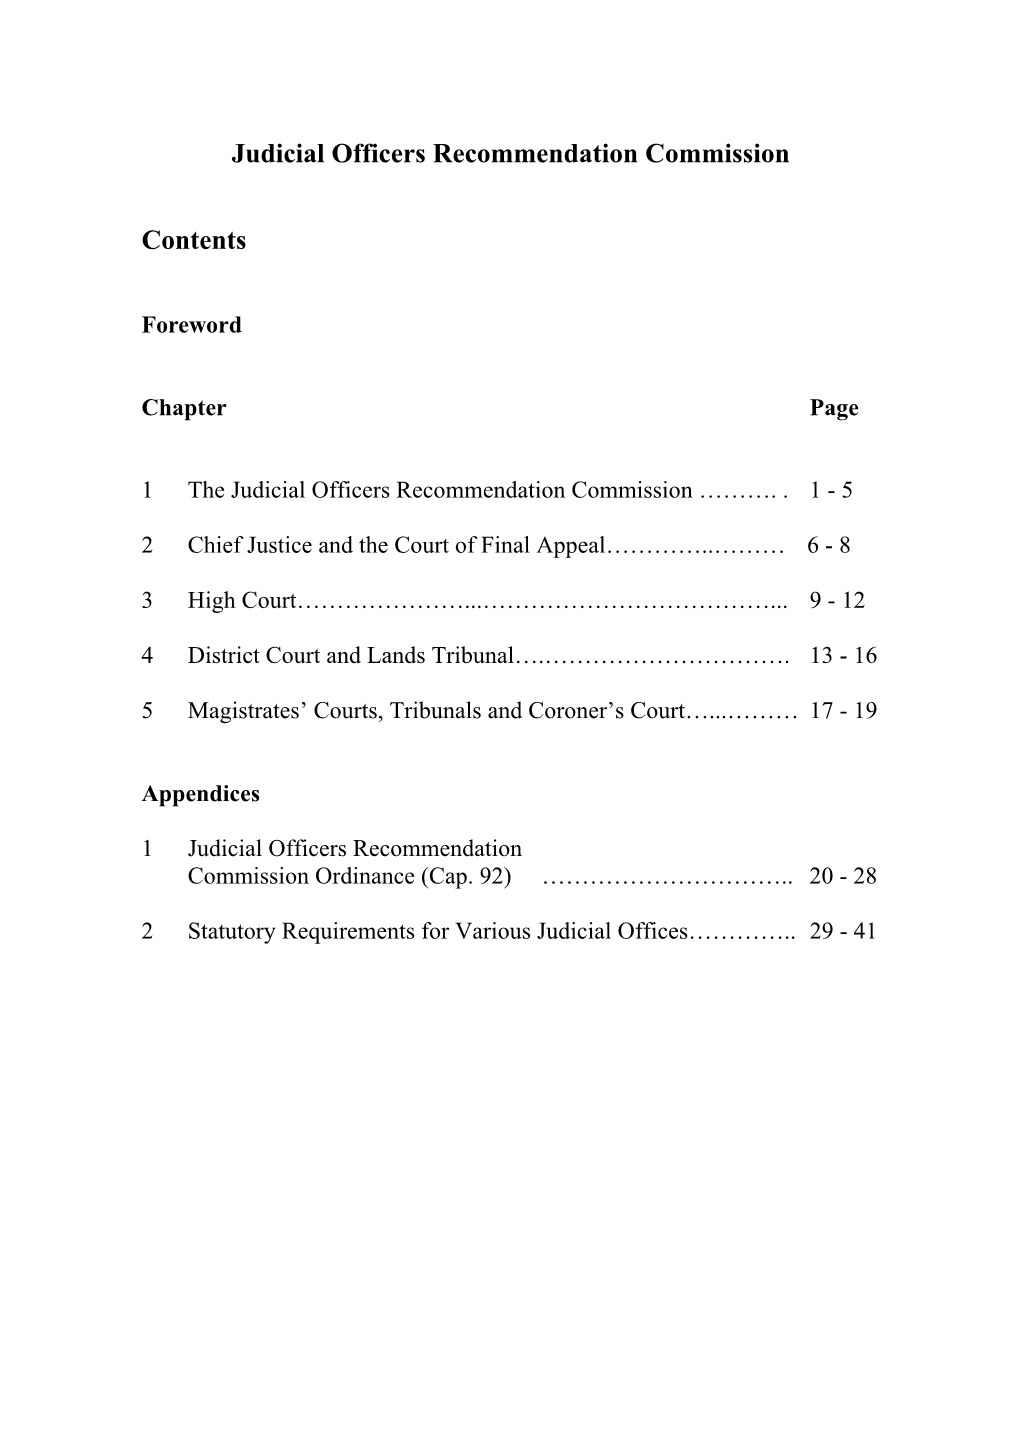 New Report: Judicial Officers Recommendation Commission